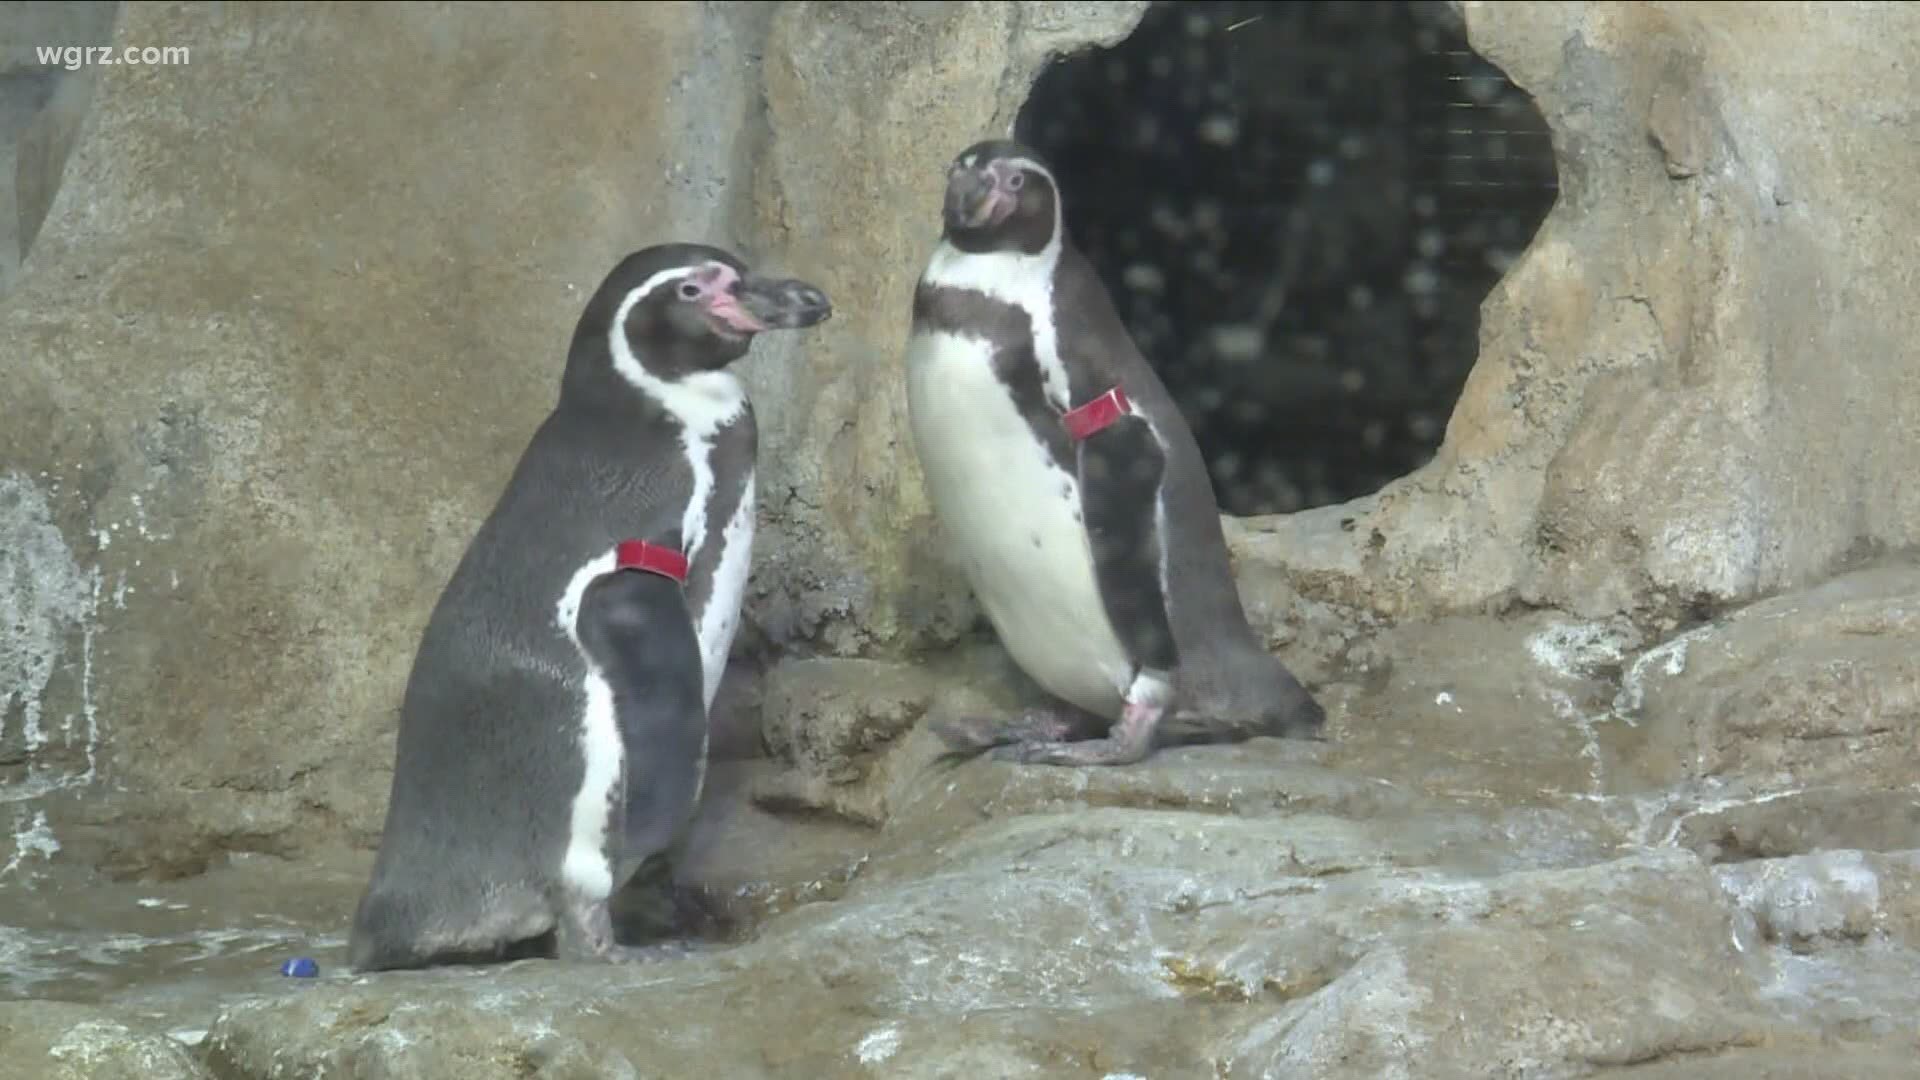 As of Saturday morning the Aquarium of Niagara says it has already sold more than 300 tickets online.